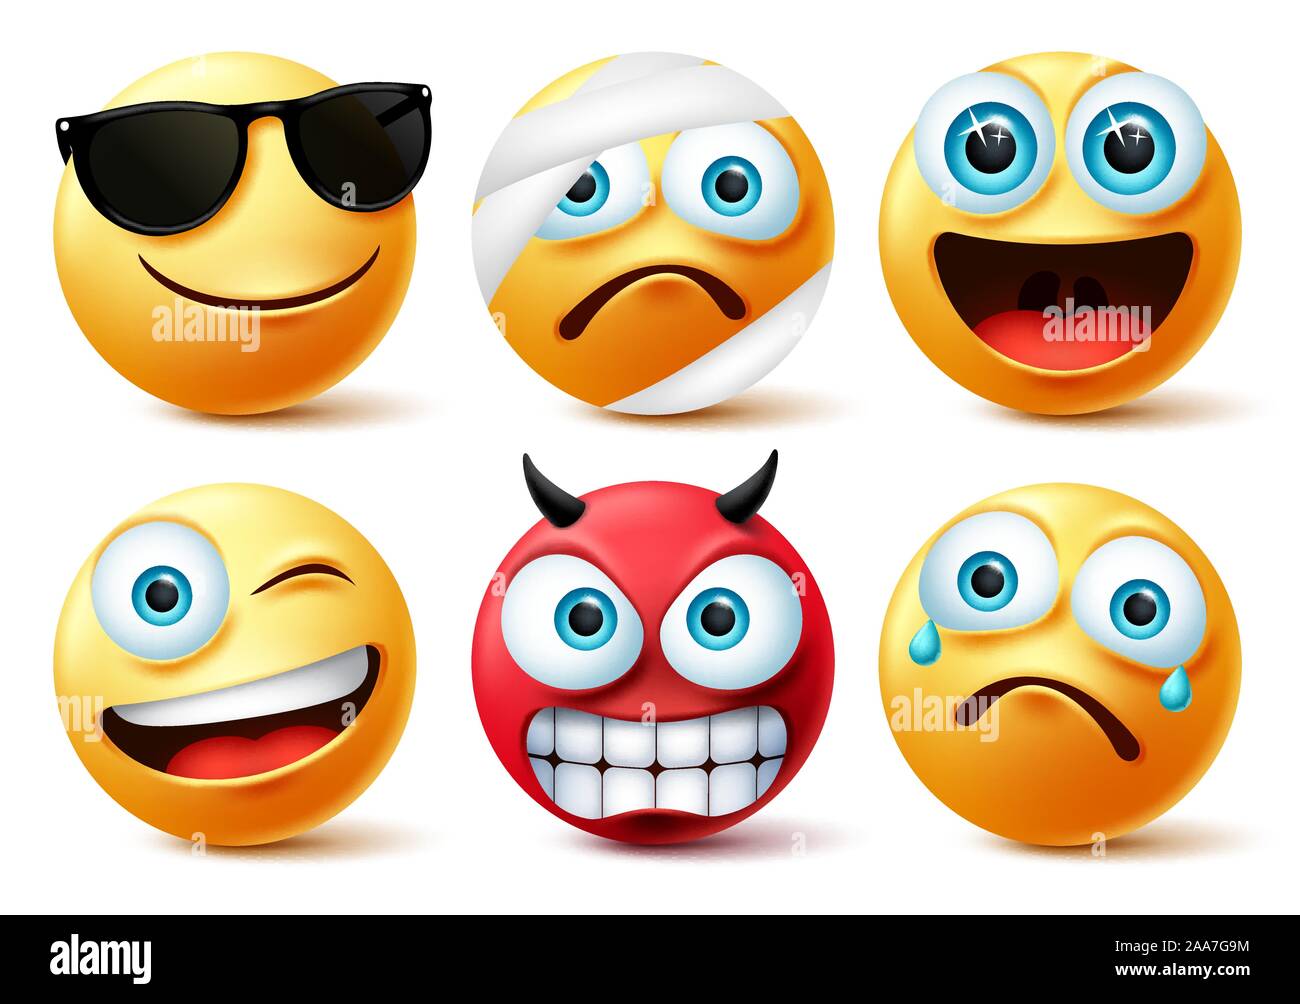 Smiley emoticon or emoji face vector set. Smileys yellow face icon and emoticons in devil, injured, surprise, angry and funny facial expressions. Stock Vector